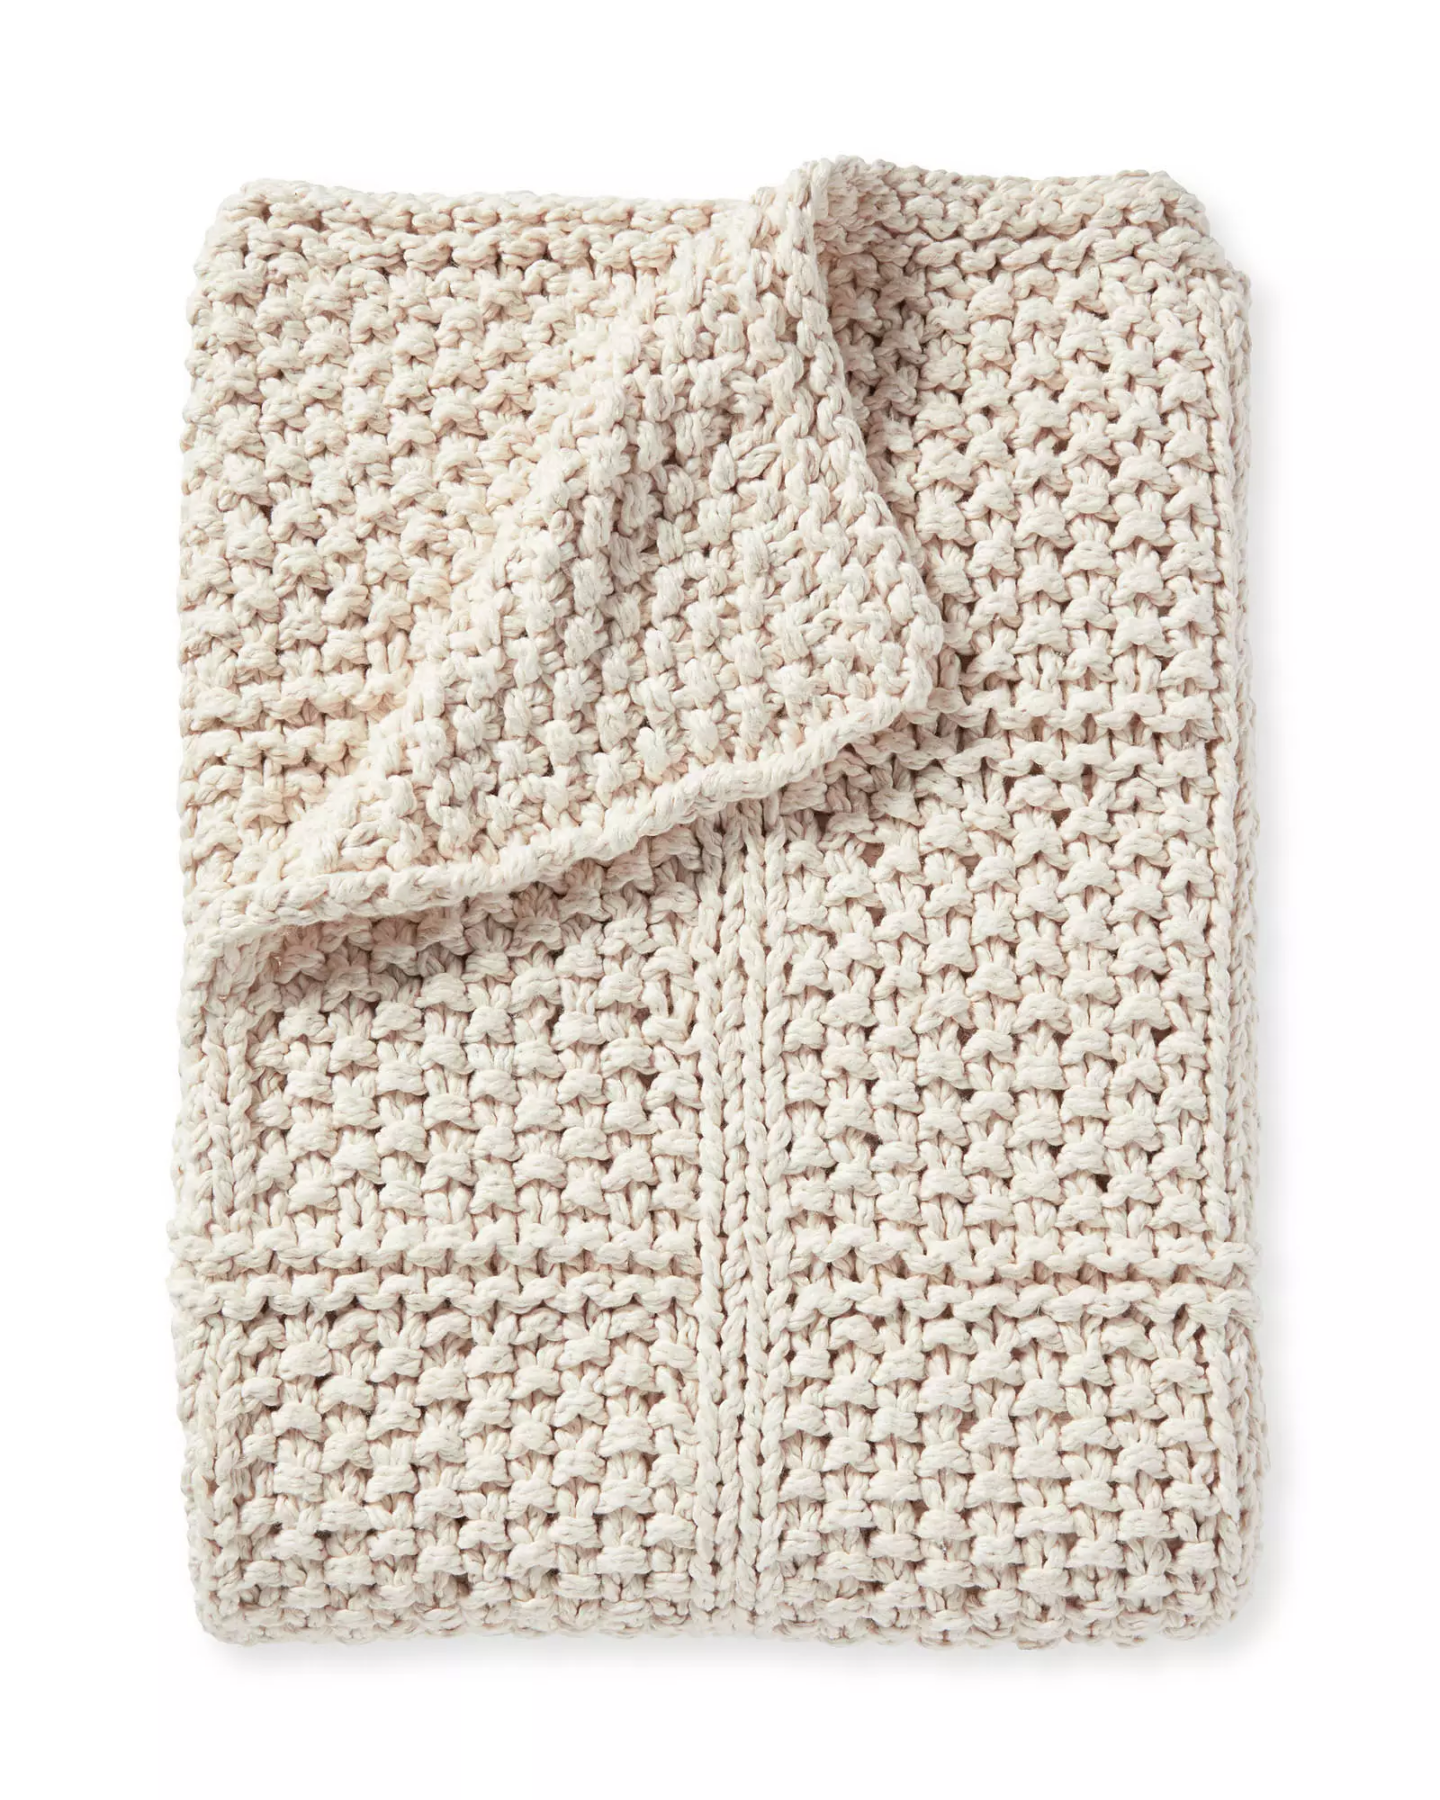 Fisherman's Knit Throw, Serena & Lily